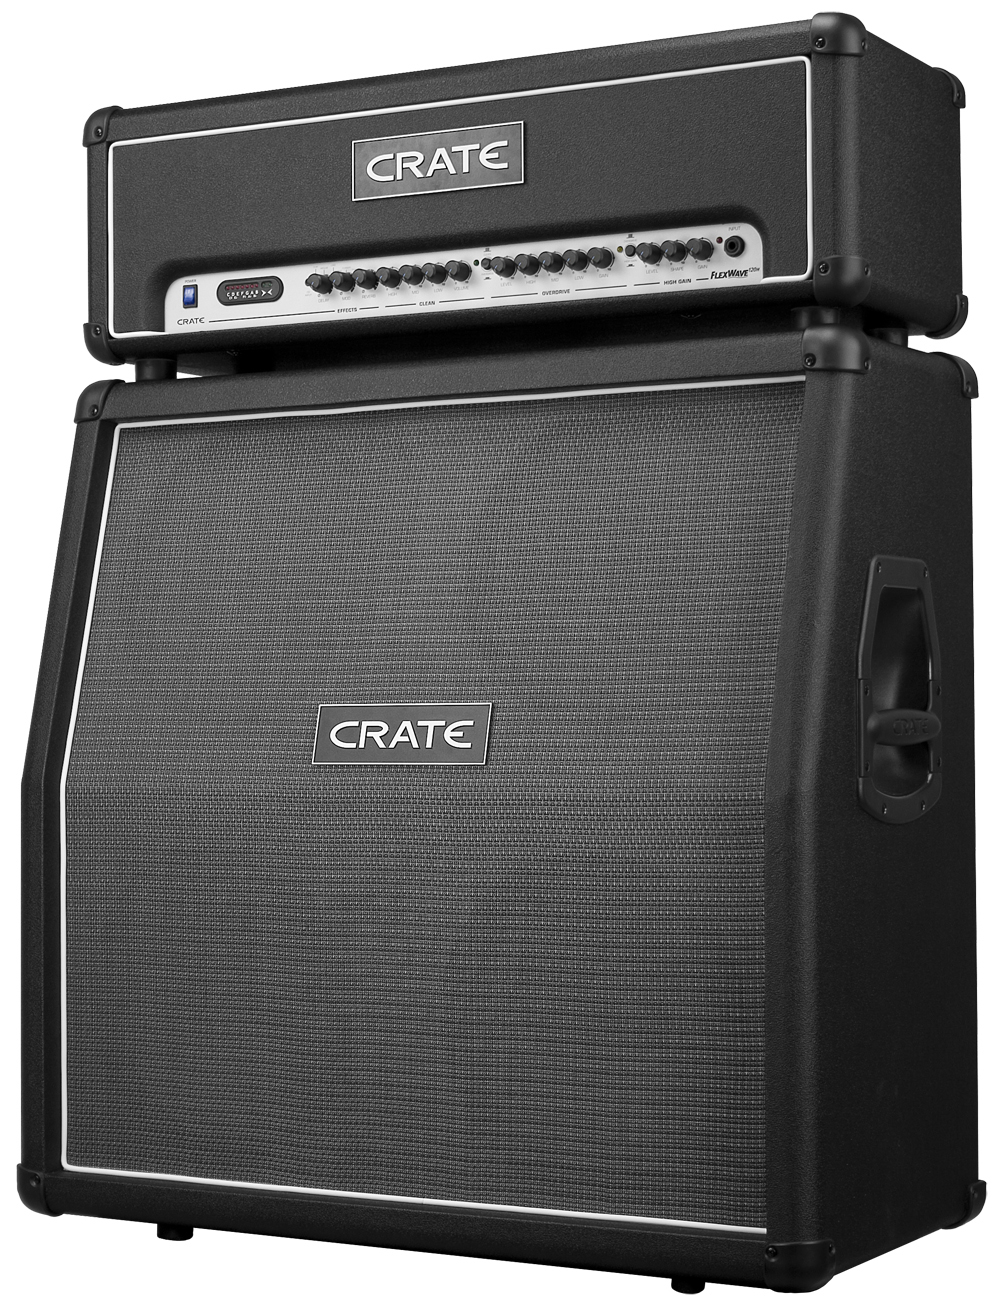 Crate Crate FlexWave Guitar Half Stack (FW120H Head, FW412A Cabinet)